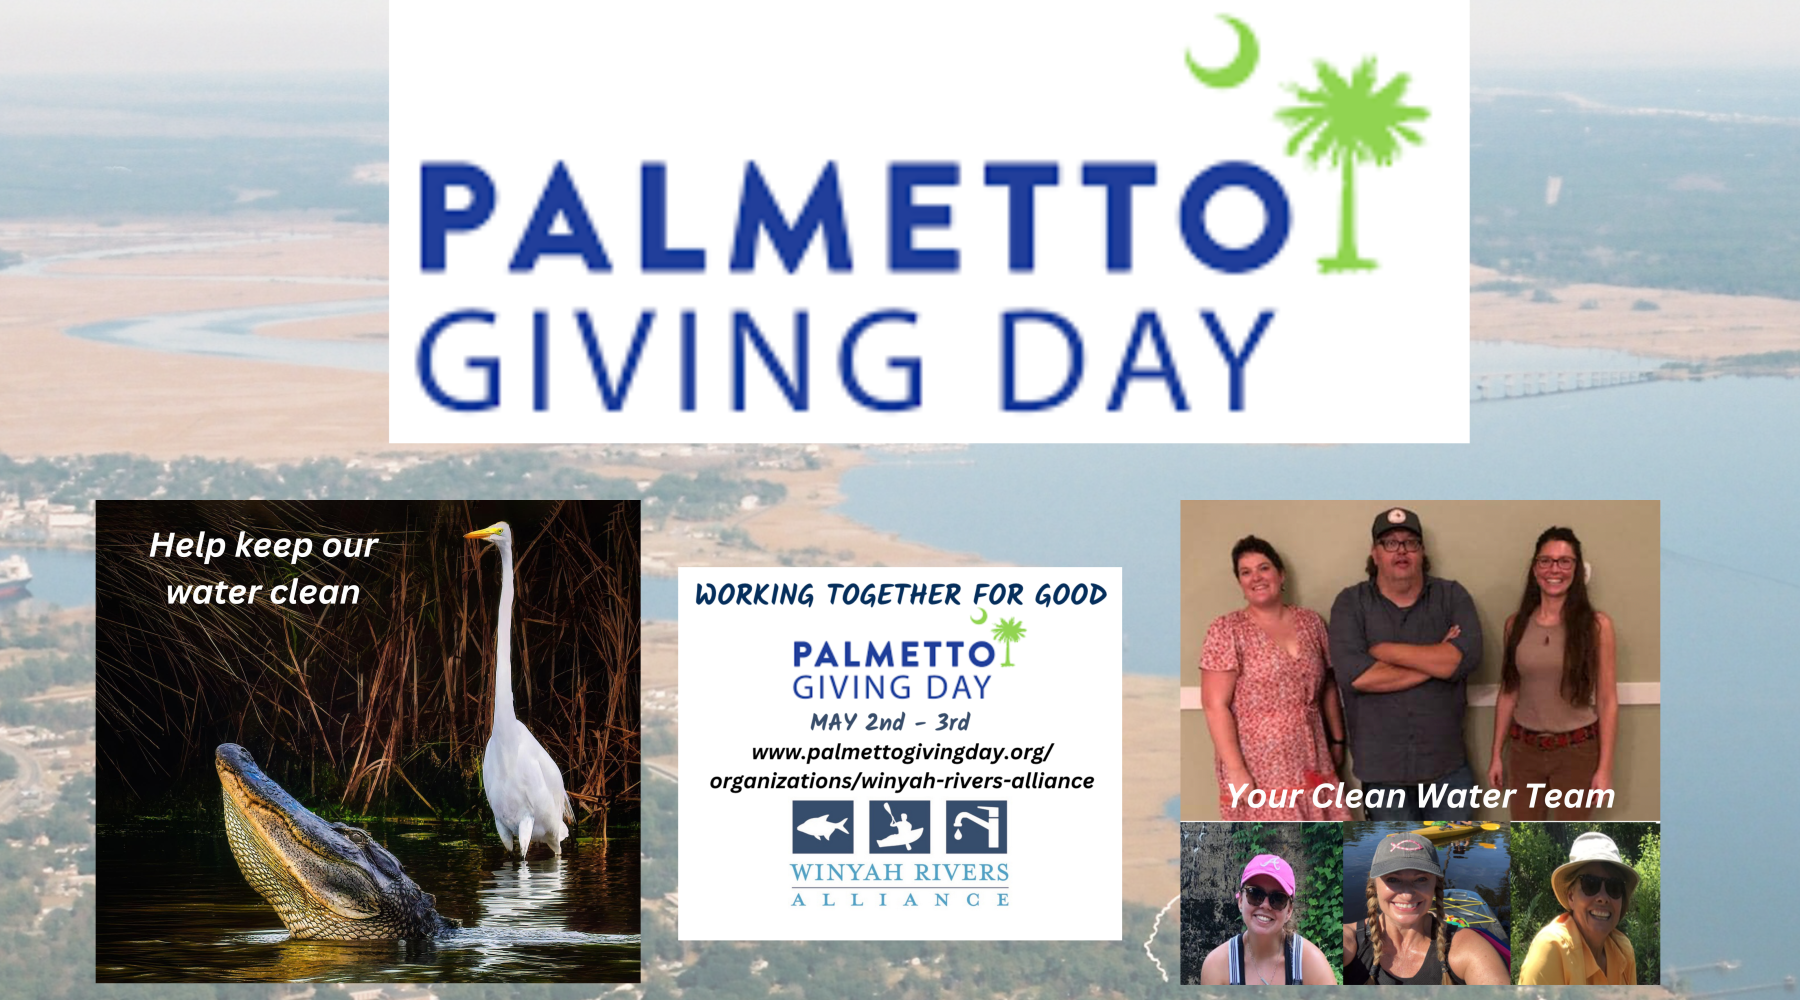 Help keep our water clean - donate on Palmetto Giving Day